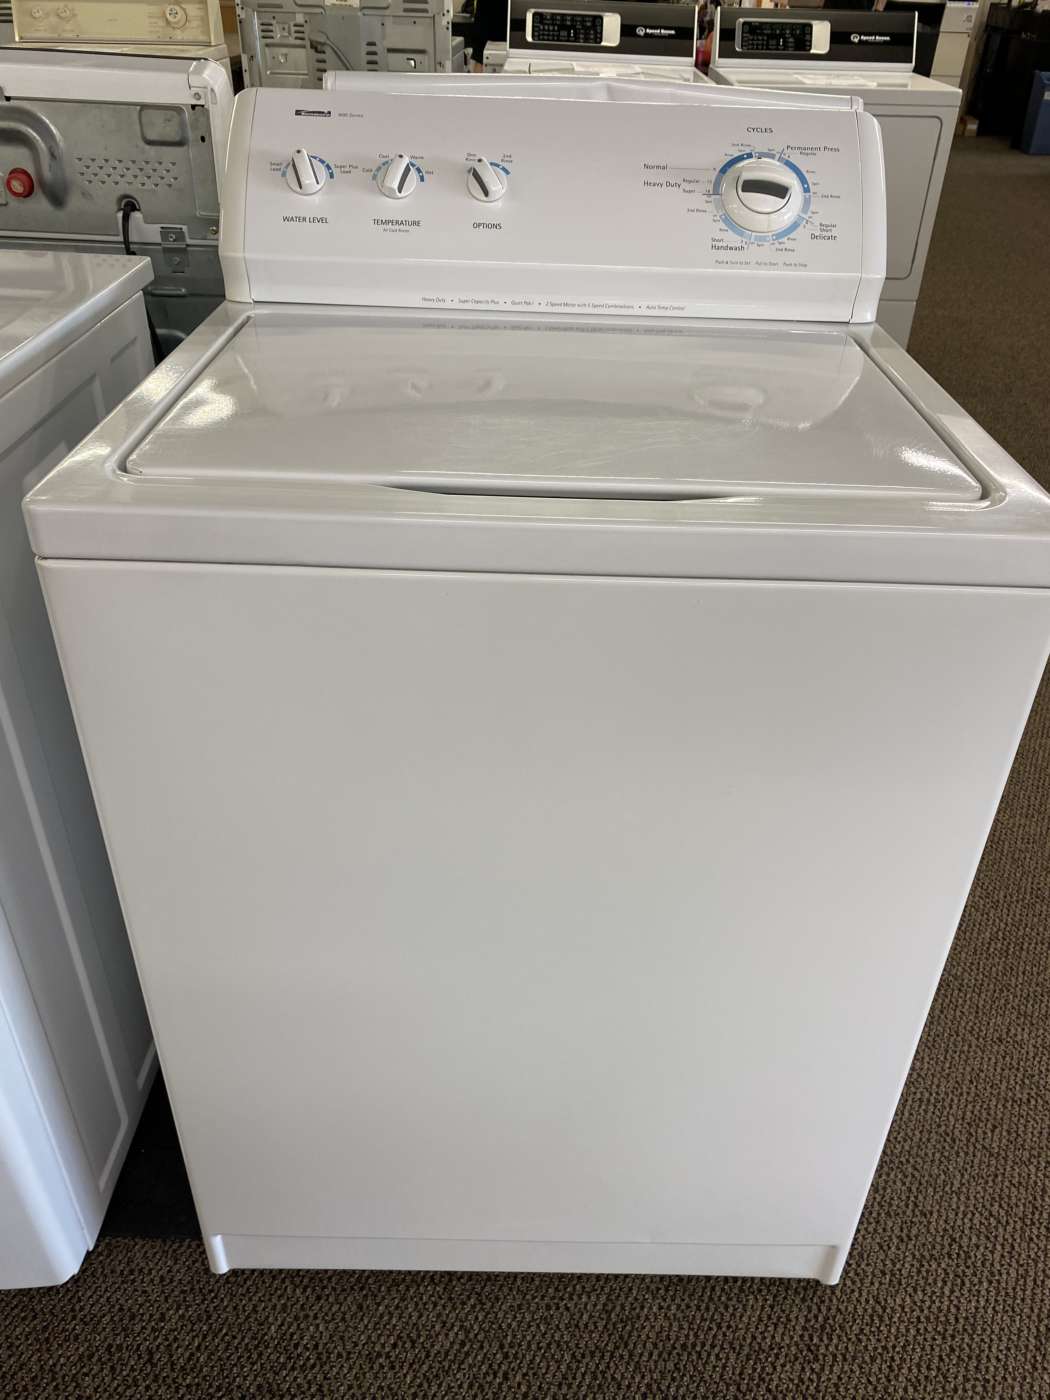 Reconditioned KENMORE 3.4 Cu. Ft. Top-Load Washer – White